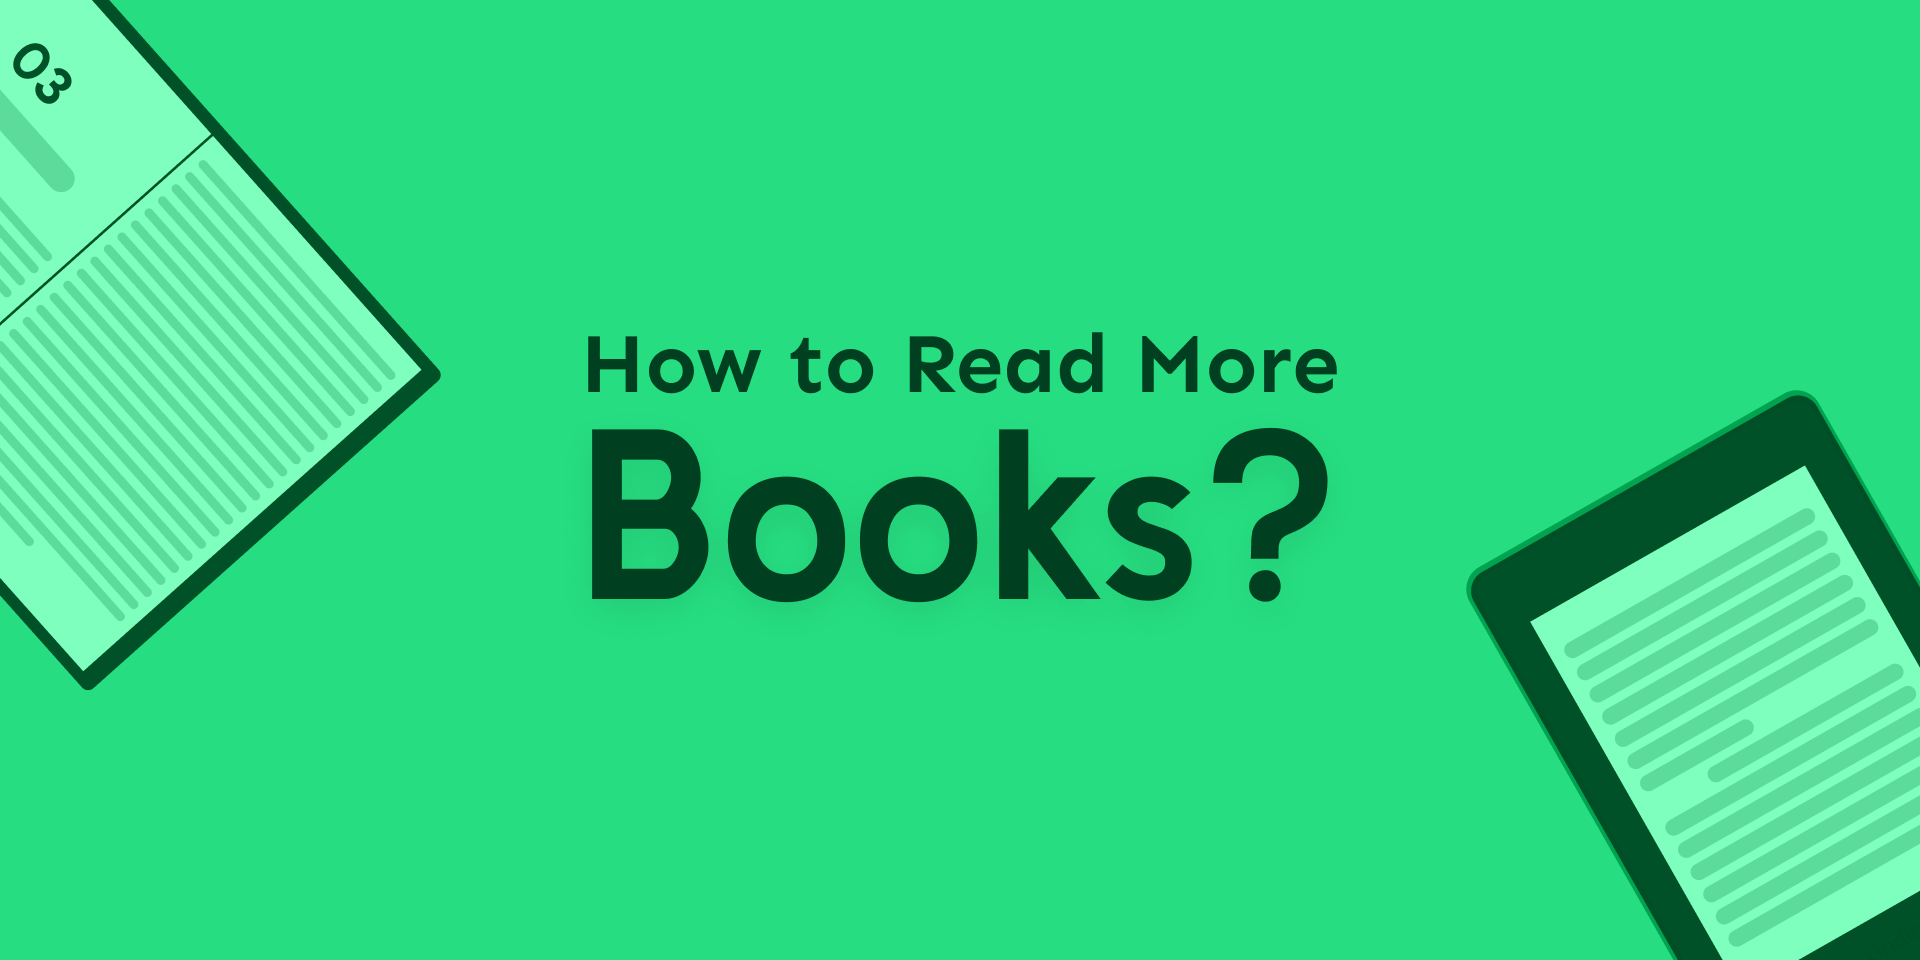 How to Read More Books?